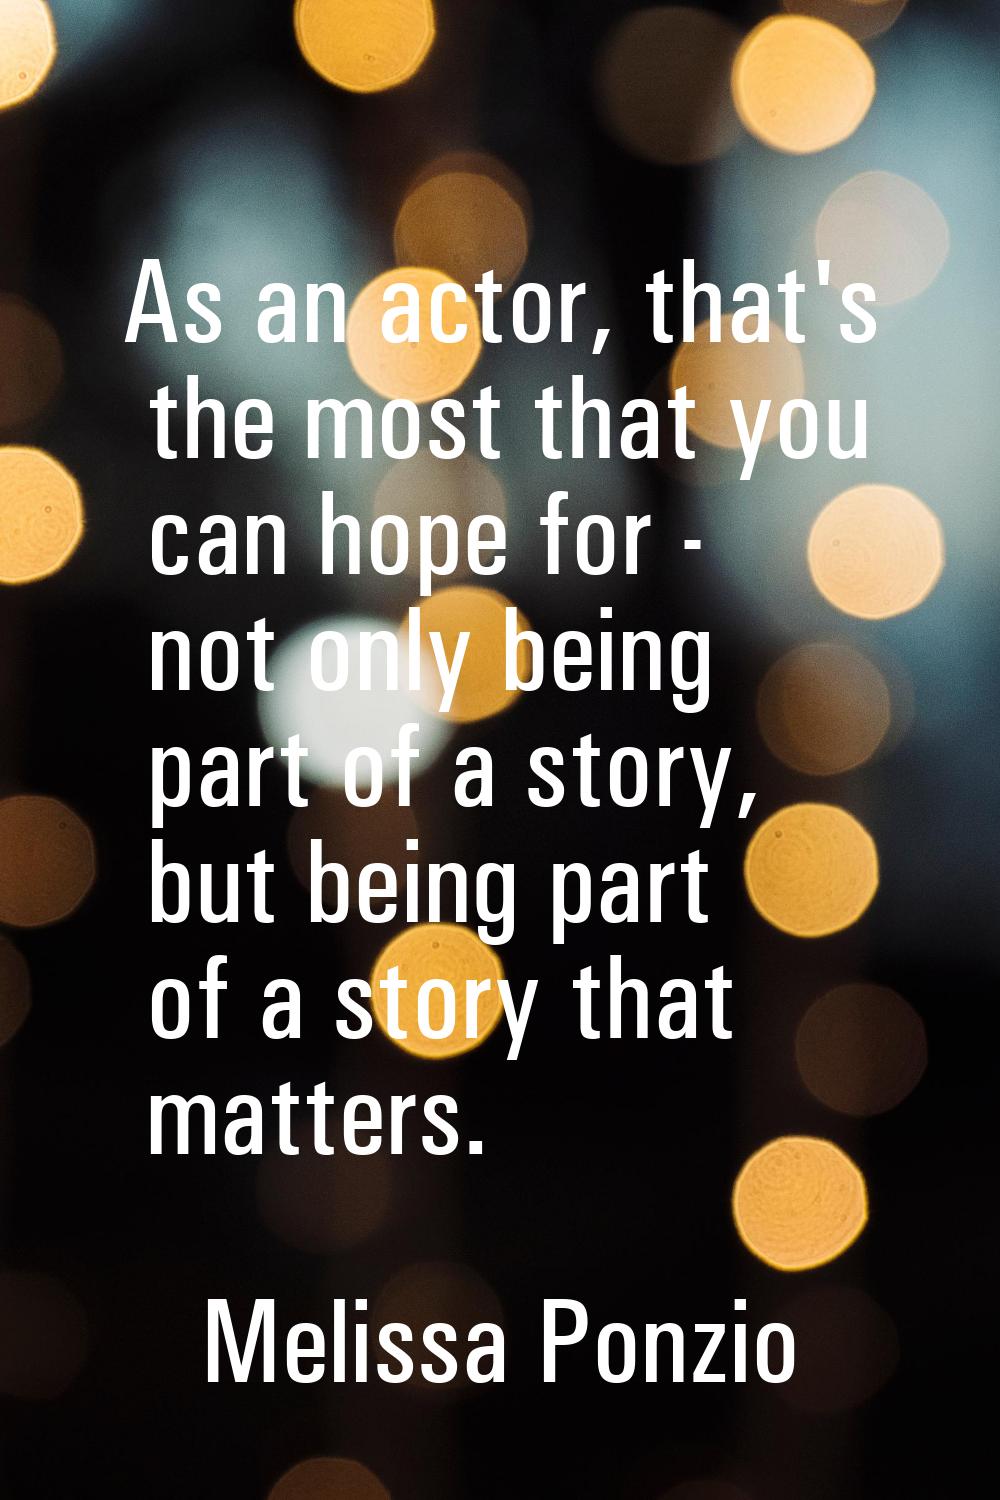 As an actor, that's the most that you can hope for - not only being part of a story, but being part